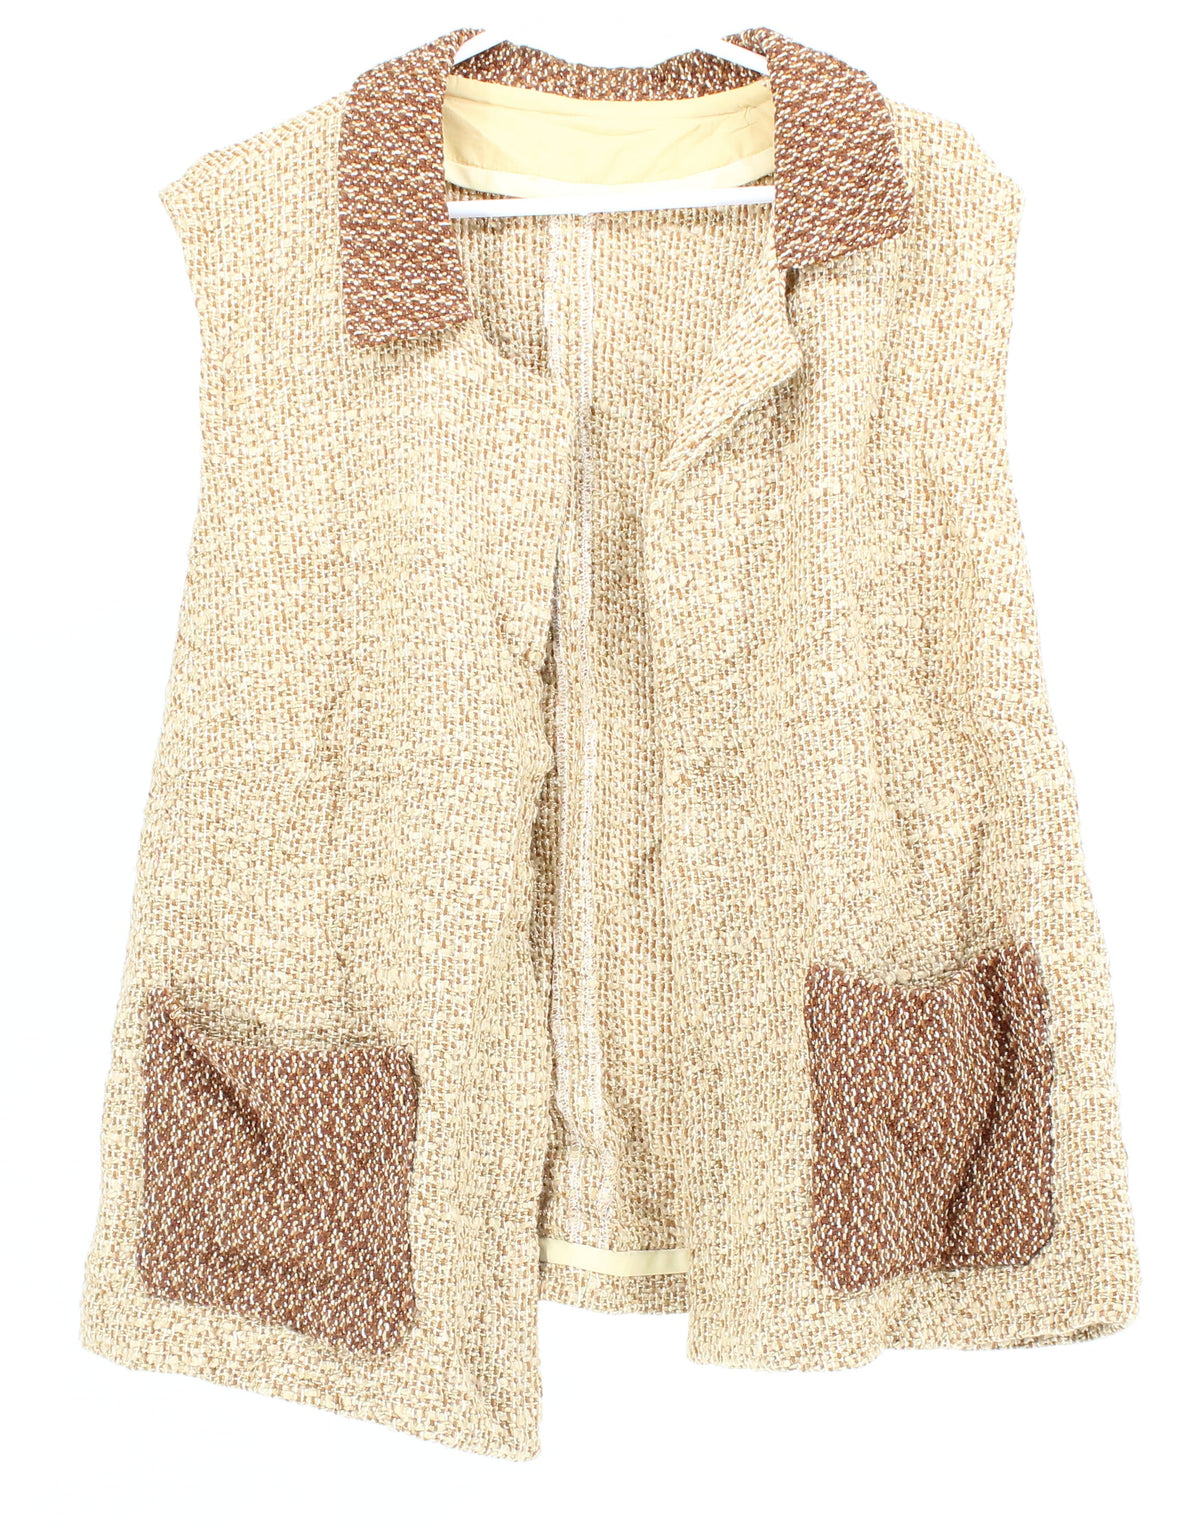 Beige Vest With Brown Collar And Front Pockets